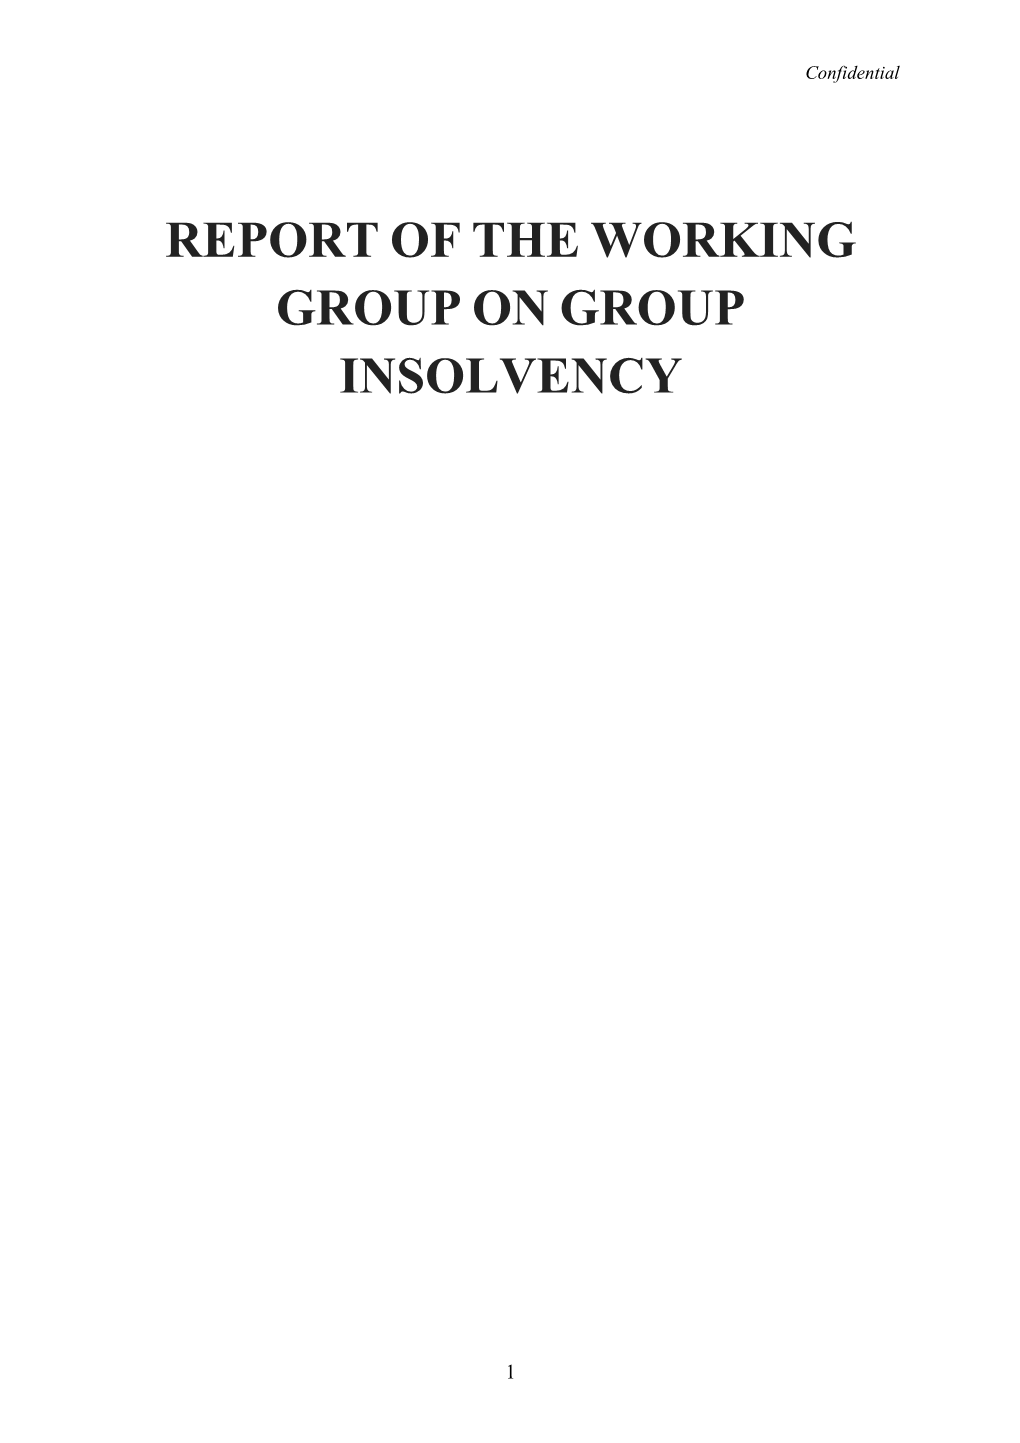 Report of the Working Group on Group Insolvency